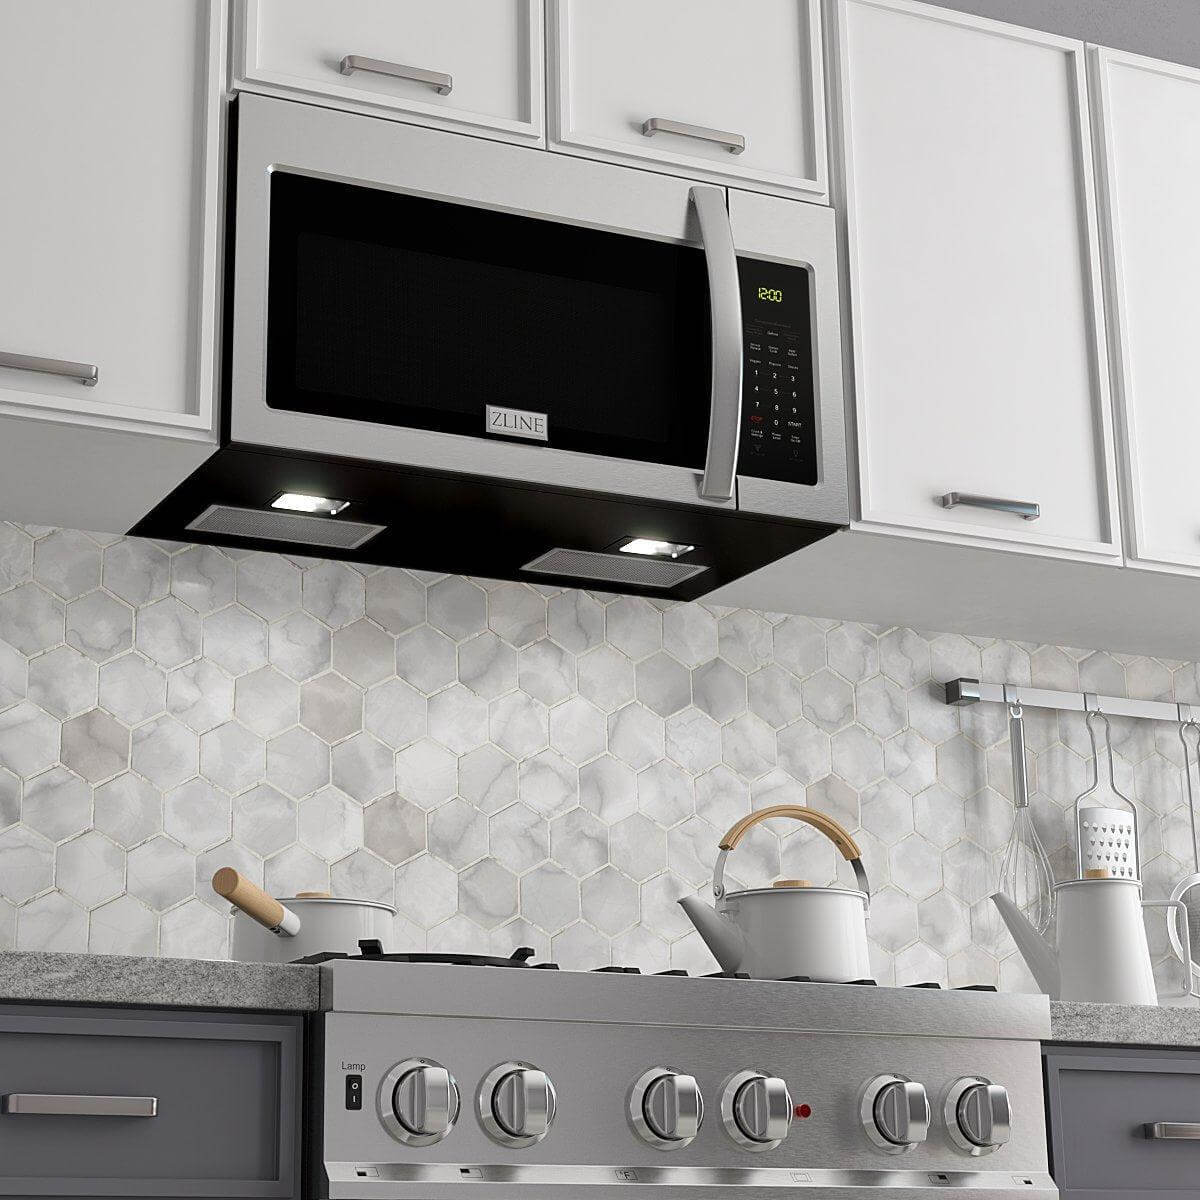 ZLINE Stainless Steel Over the Range Convection Microwave Oven with Modern Handle (MWO-OTR-30) installed in a farmhouse style kitchen over a ZLINE Range